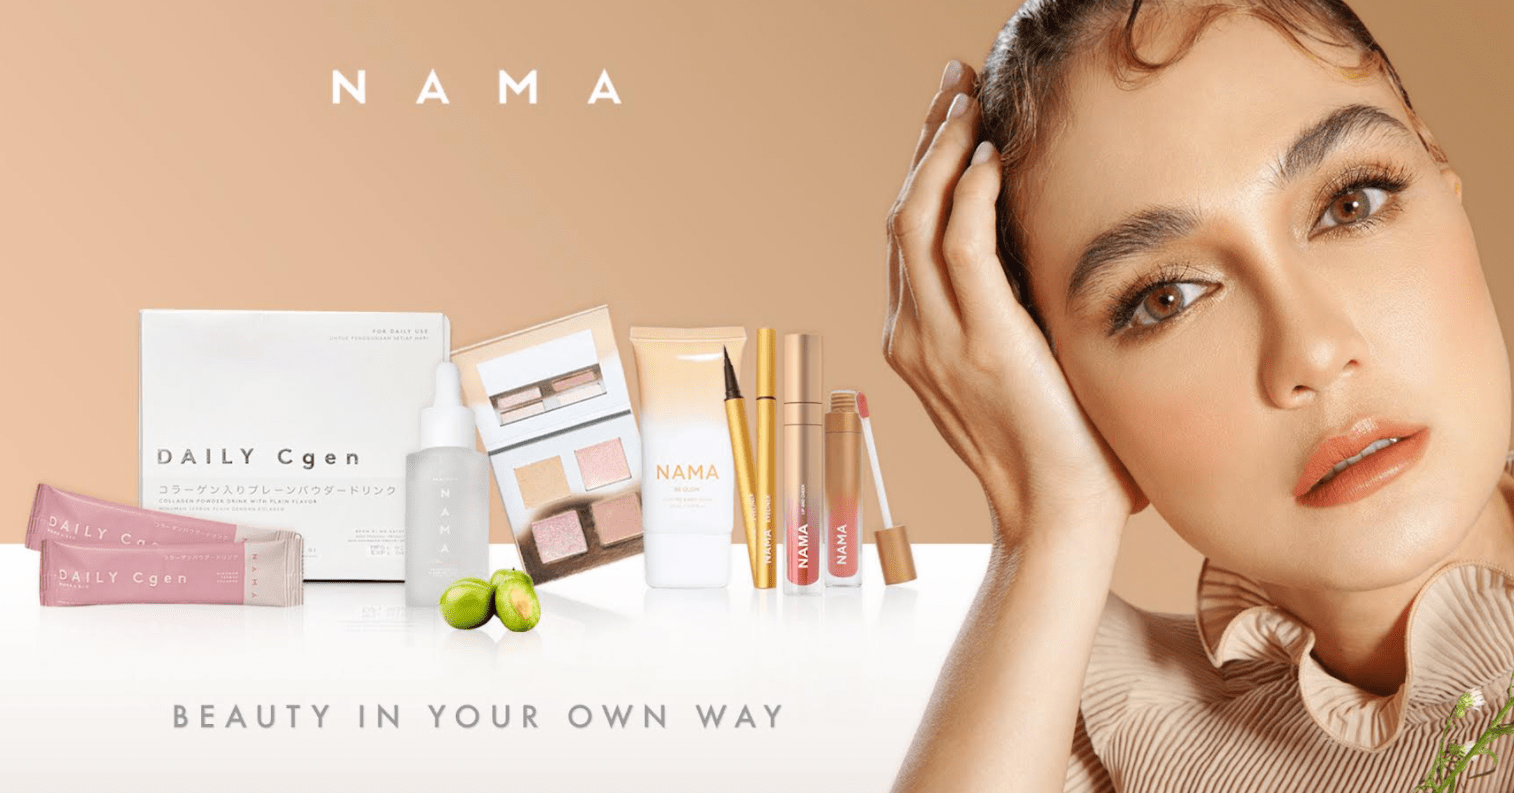 Indonesia’s NAMA Beauty seals $5m funding, gains new partnerships to scale operations | AsiaTechDaily